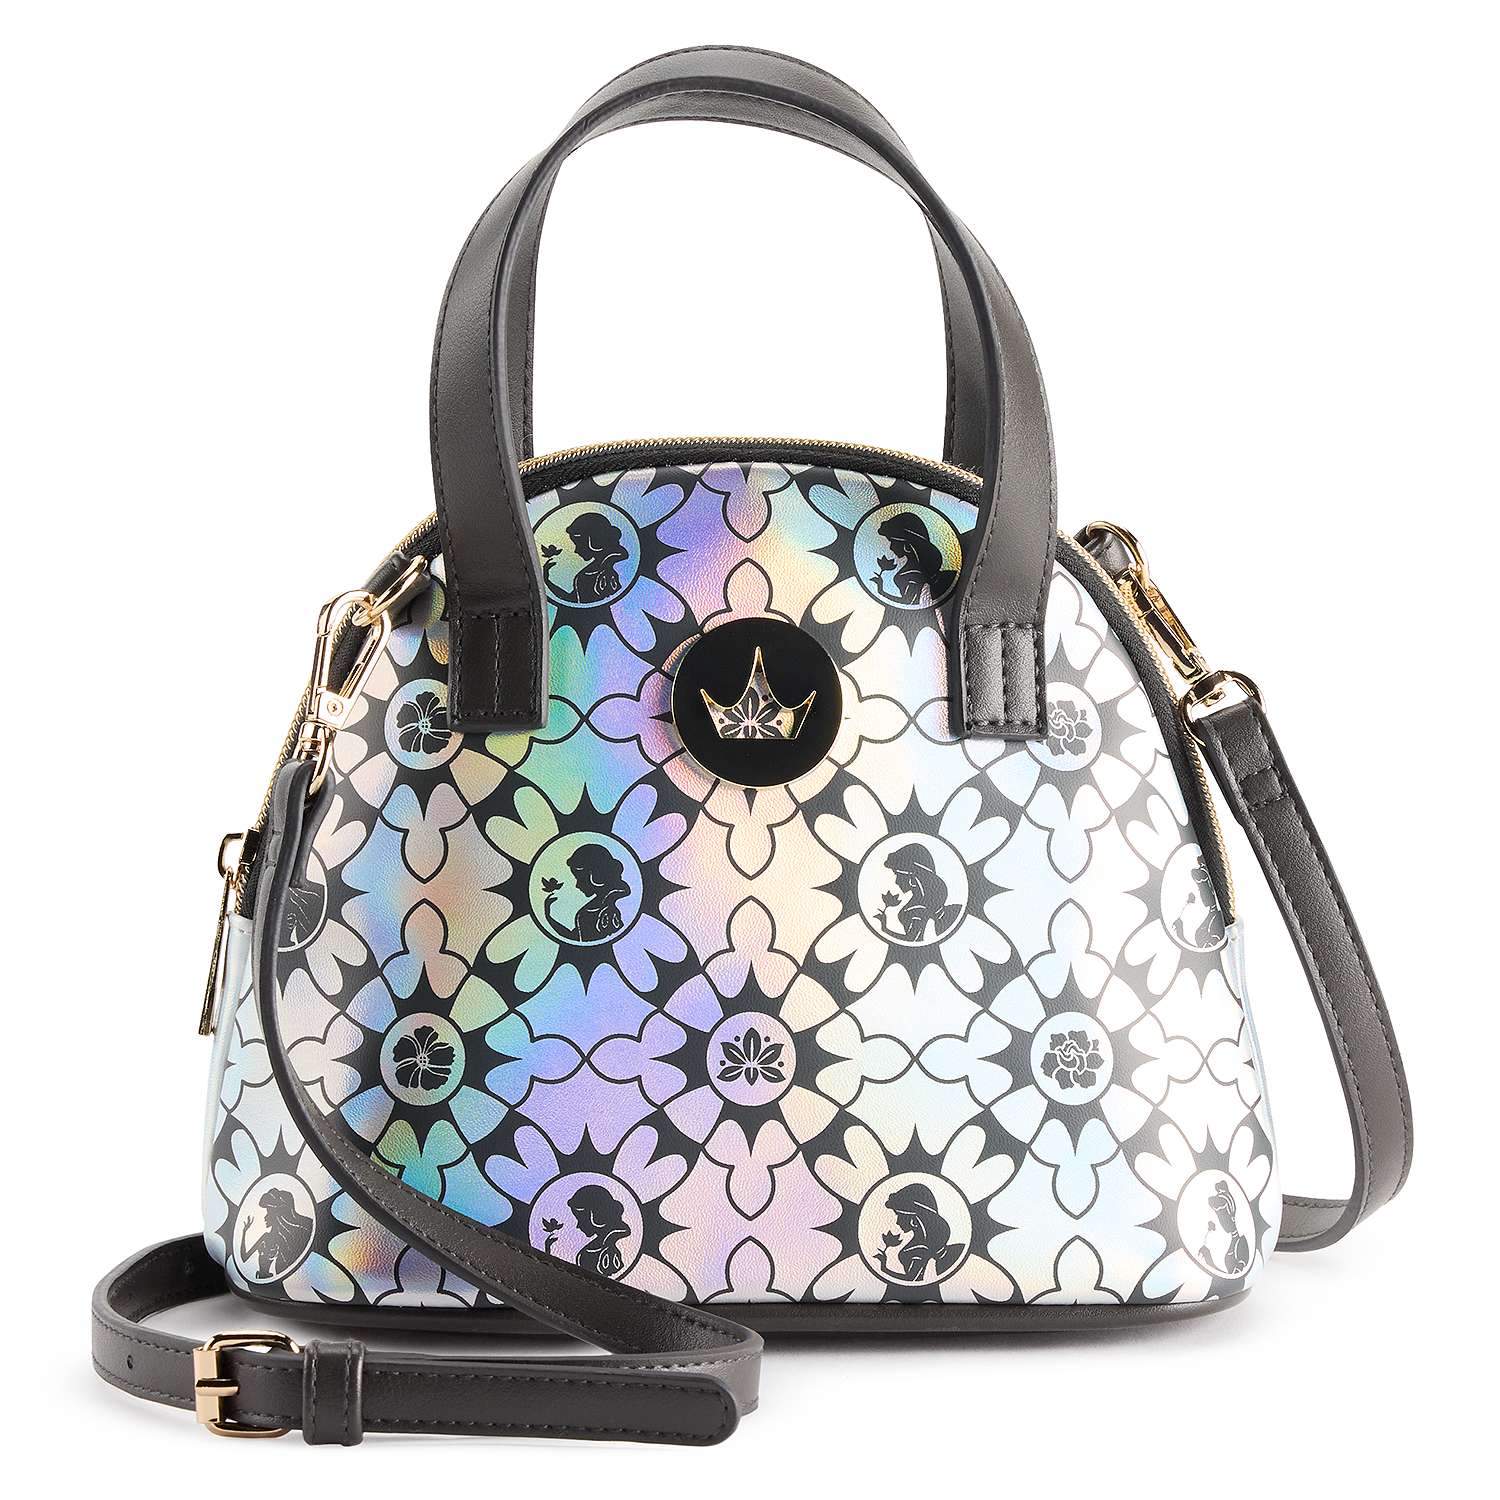 Disney 100th Classic Princess Mini Crossbody $22.50, Disney's Minnie Mouse Polka Dot or Floral print Mini Backpack $21.25 & More + Free Store Pickup at Kohl's or F/S on Orders $49+